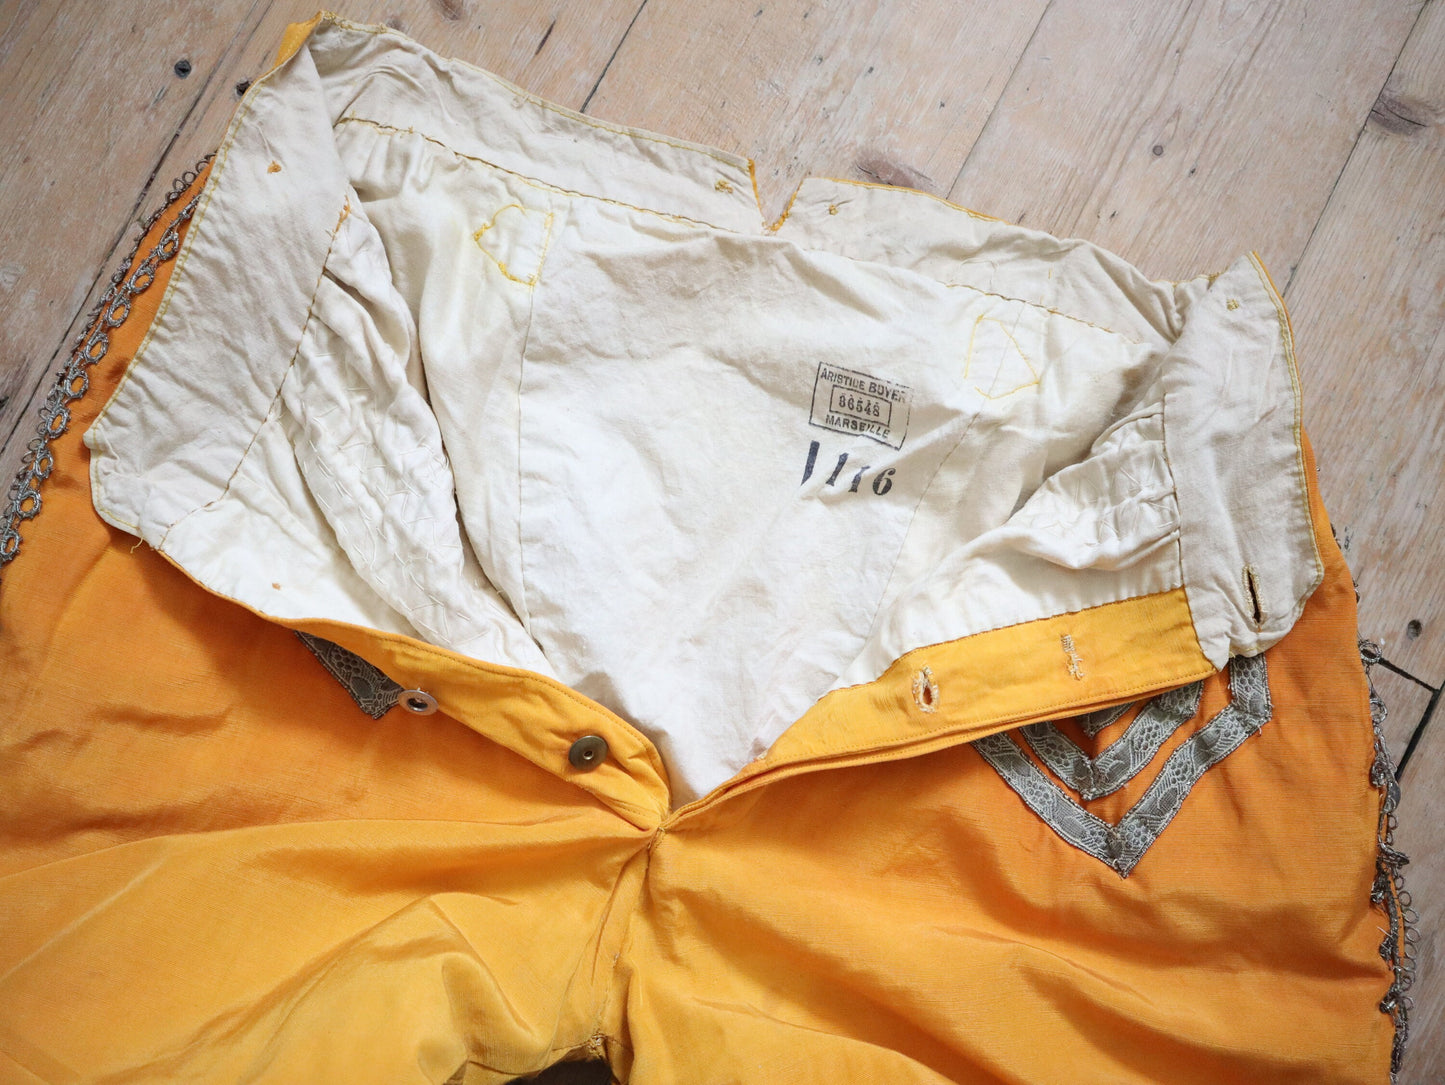 Antique Early 1900s French Yellow Silk Grosgrain Breeches Pants Gold Metal Thread embellishments